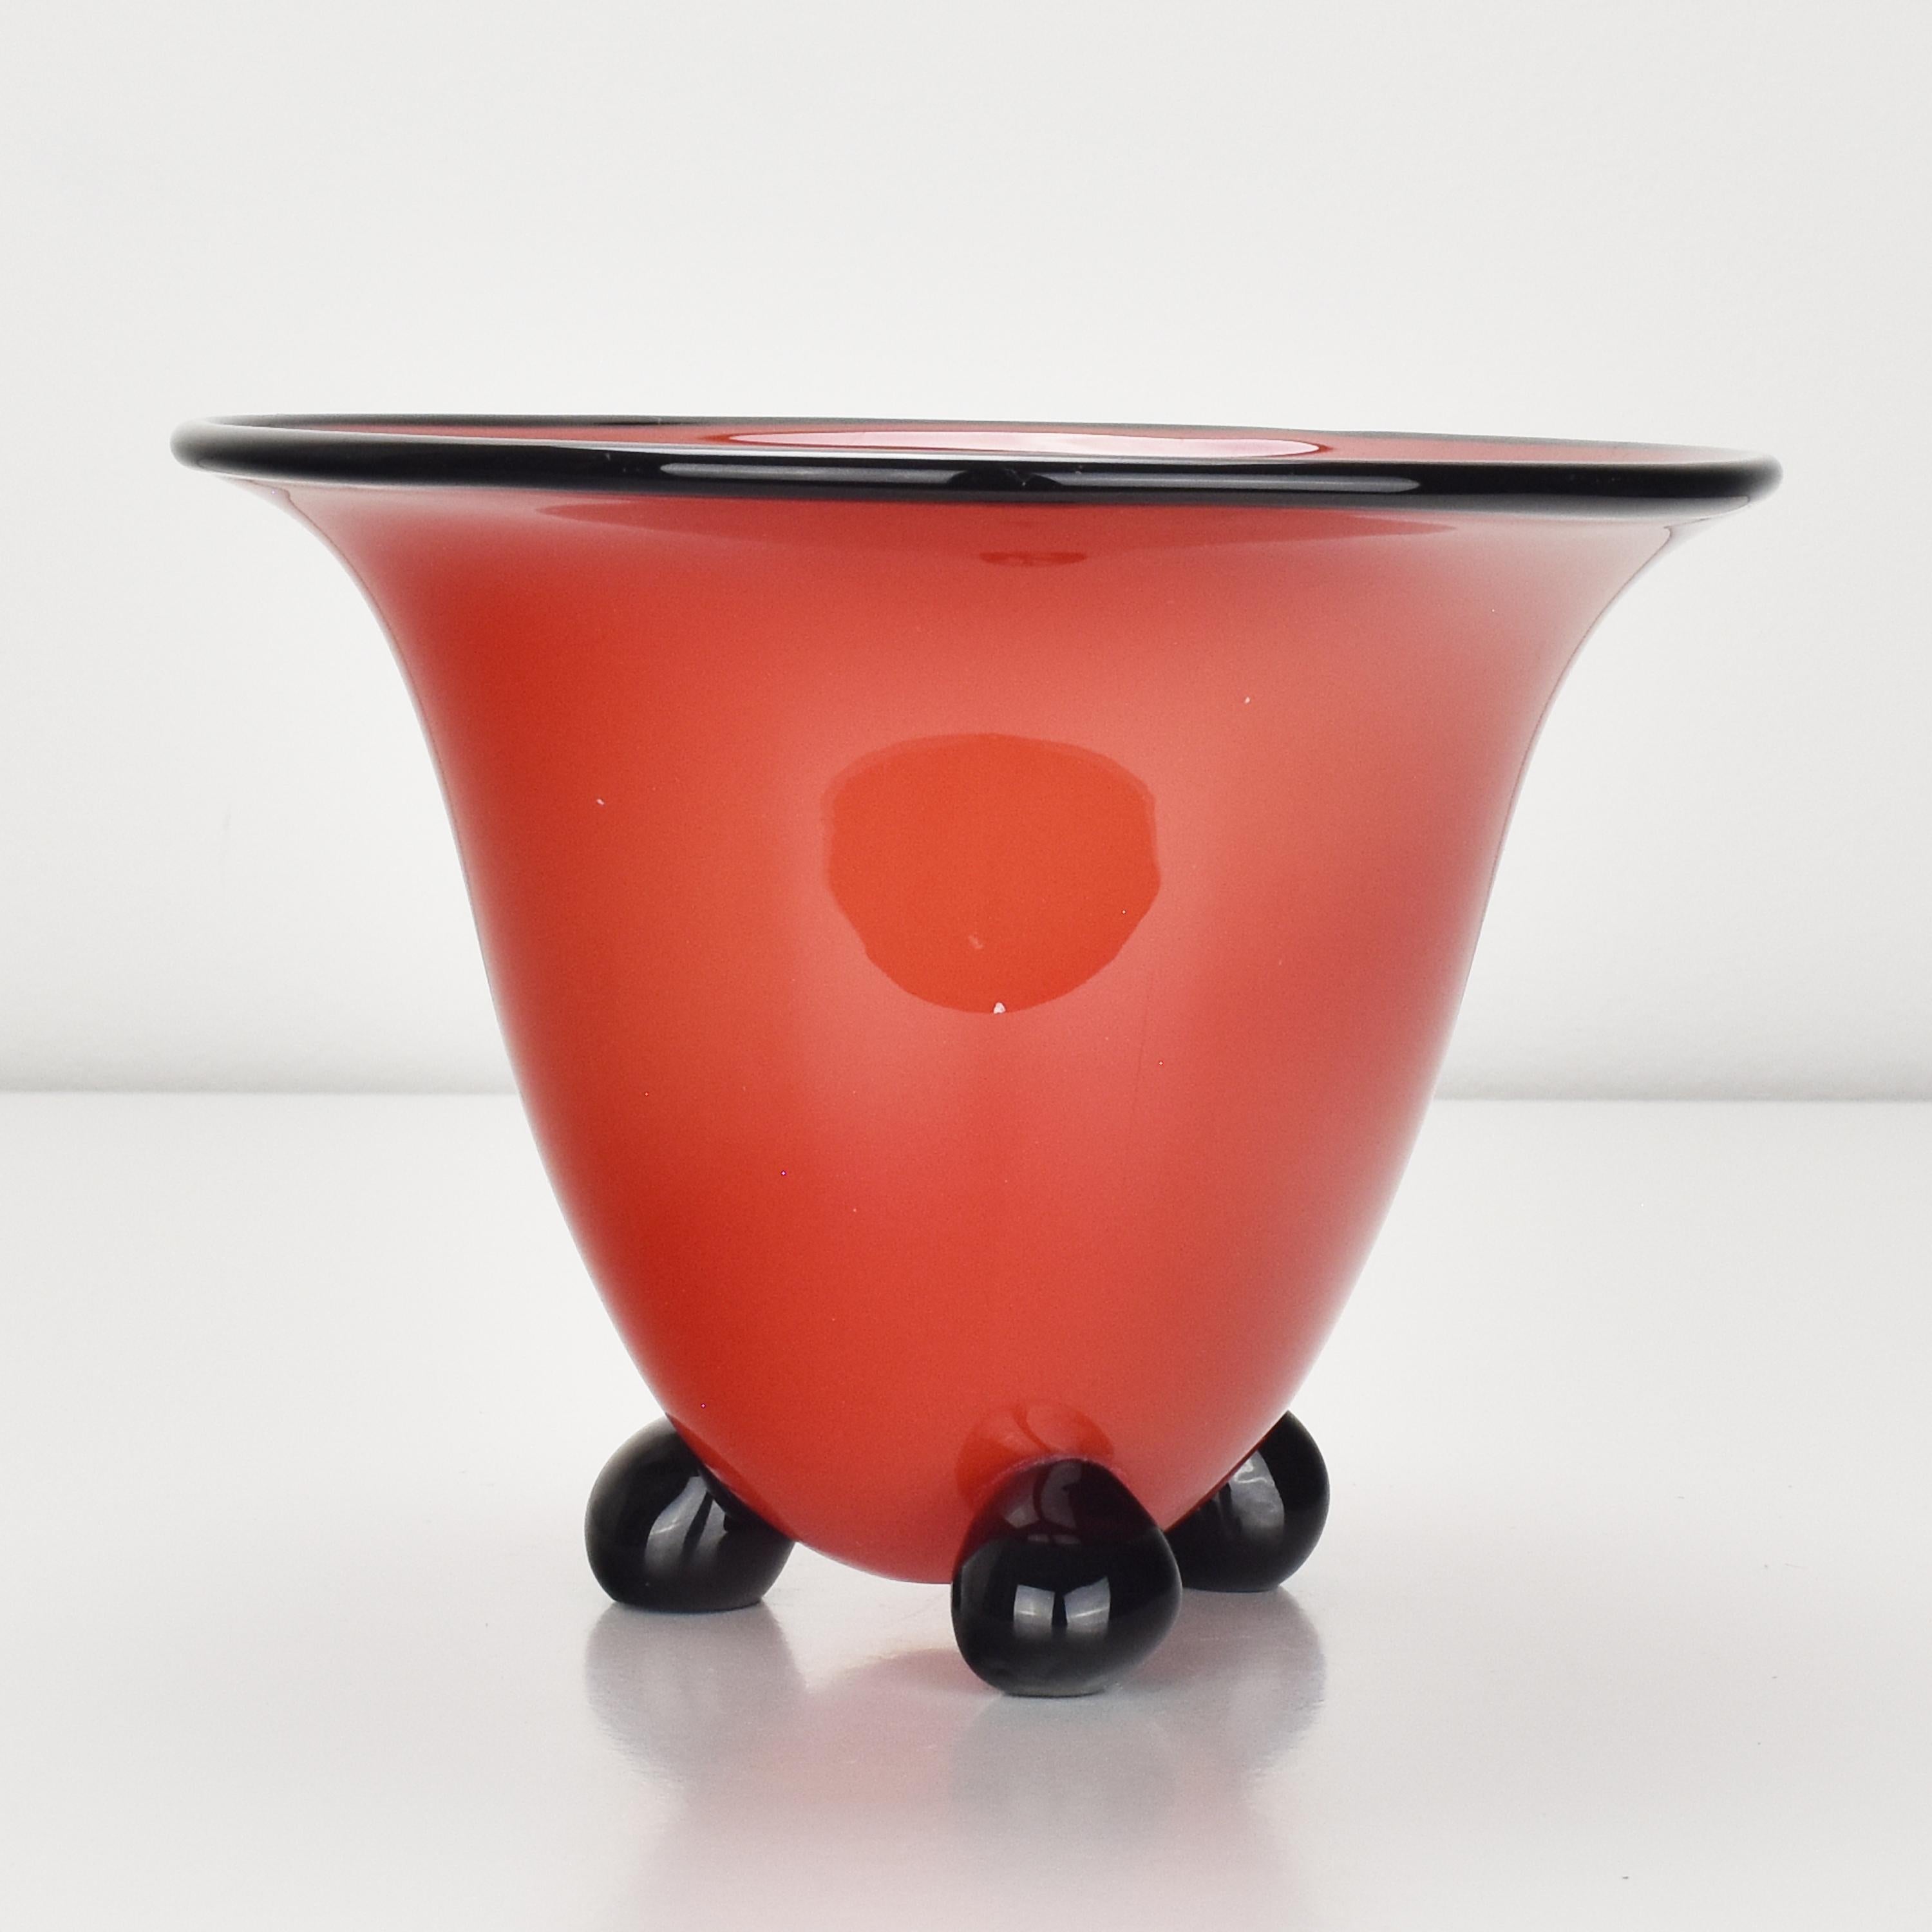 Vienna Secession Bohemian Loetz Red Tango Glass Vase w. Black Accents by Michael Powolny For Sale